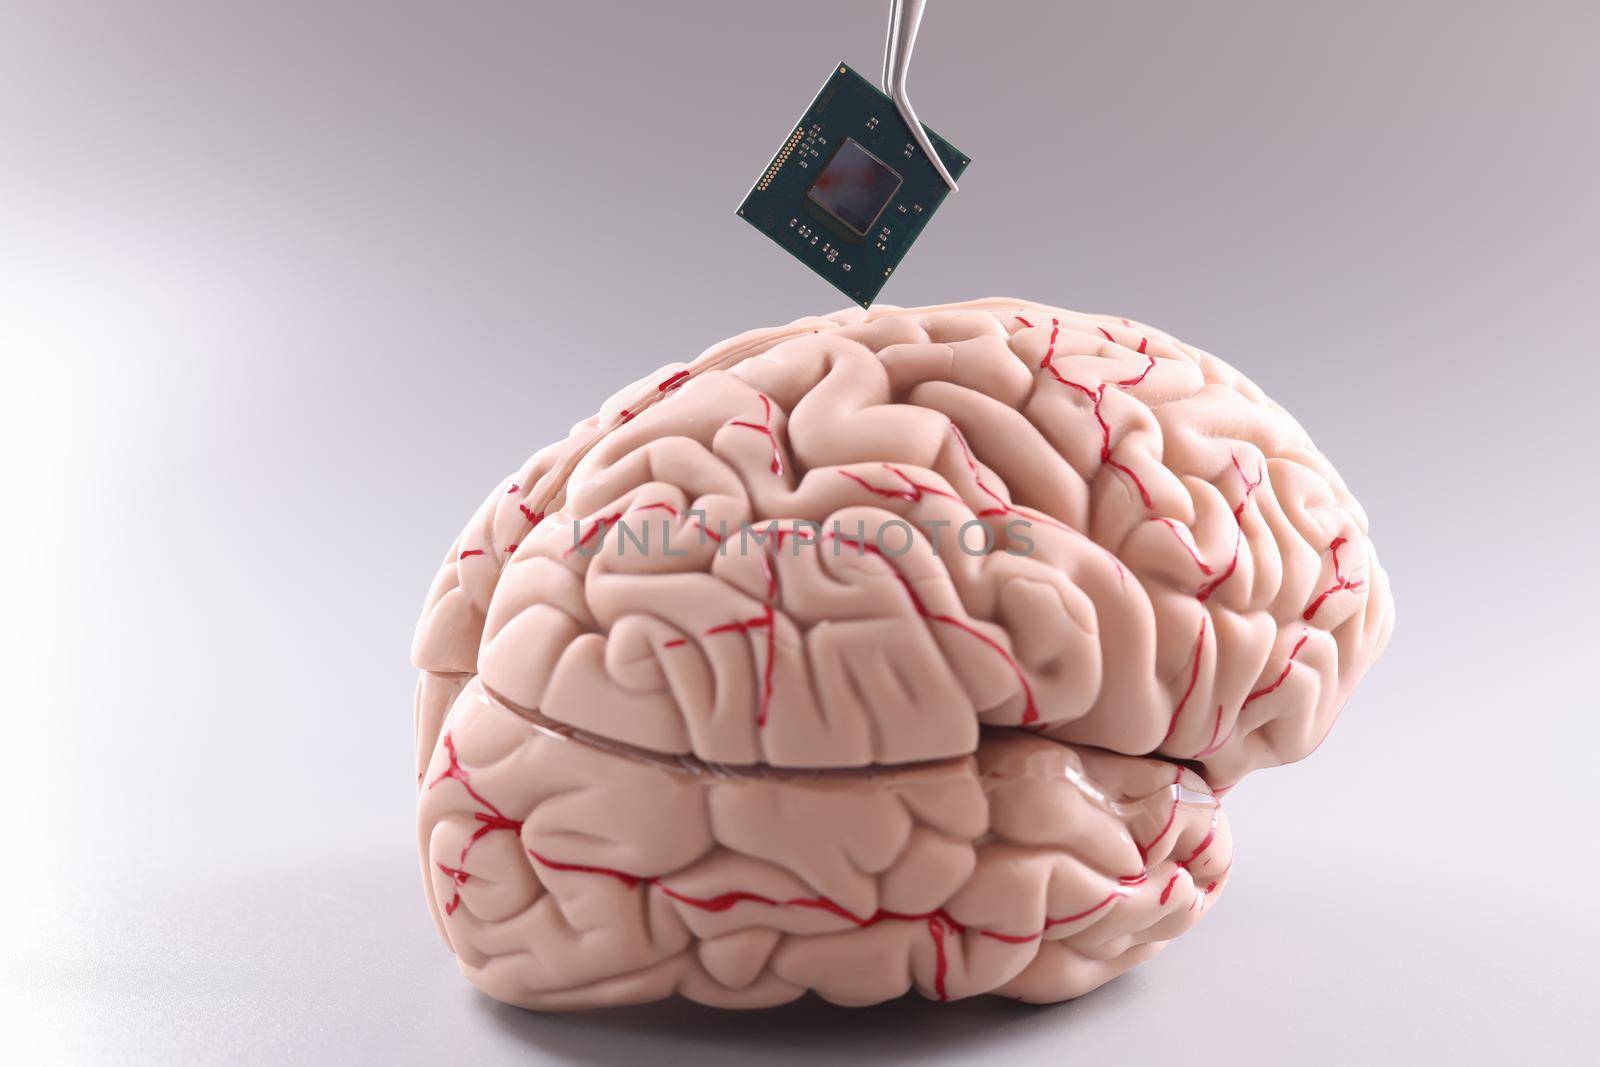 Anatomy of human brain with computer chip. Artificial intelligence chips concept